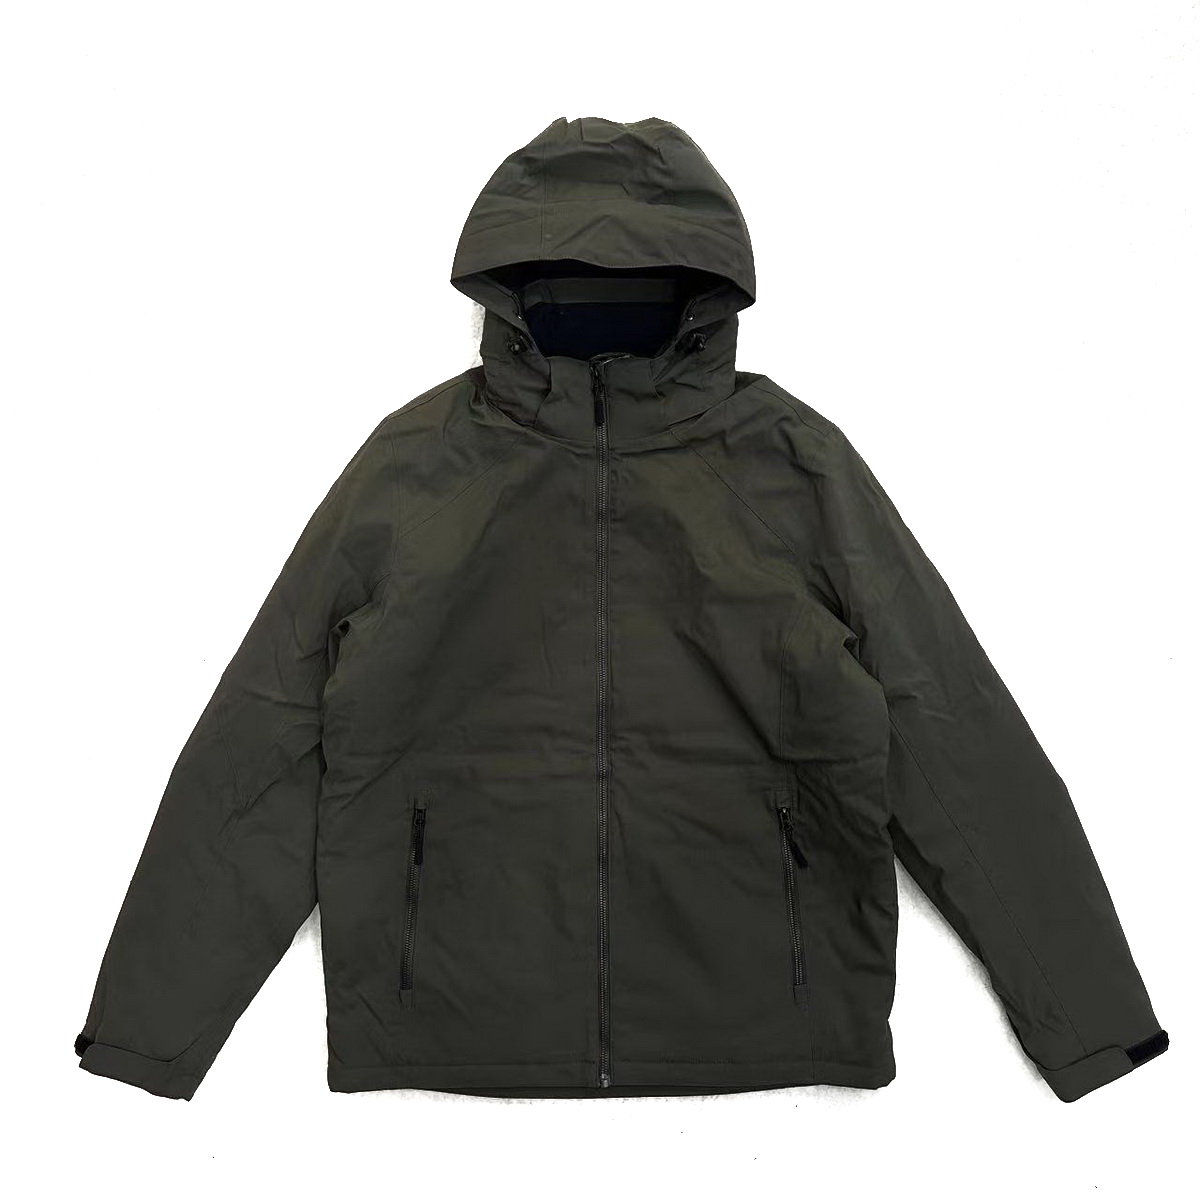 Ladies & Boys Jacket Winter Coat with Padding Apparel Fashion Clothes Outdoor Clothing